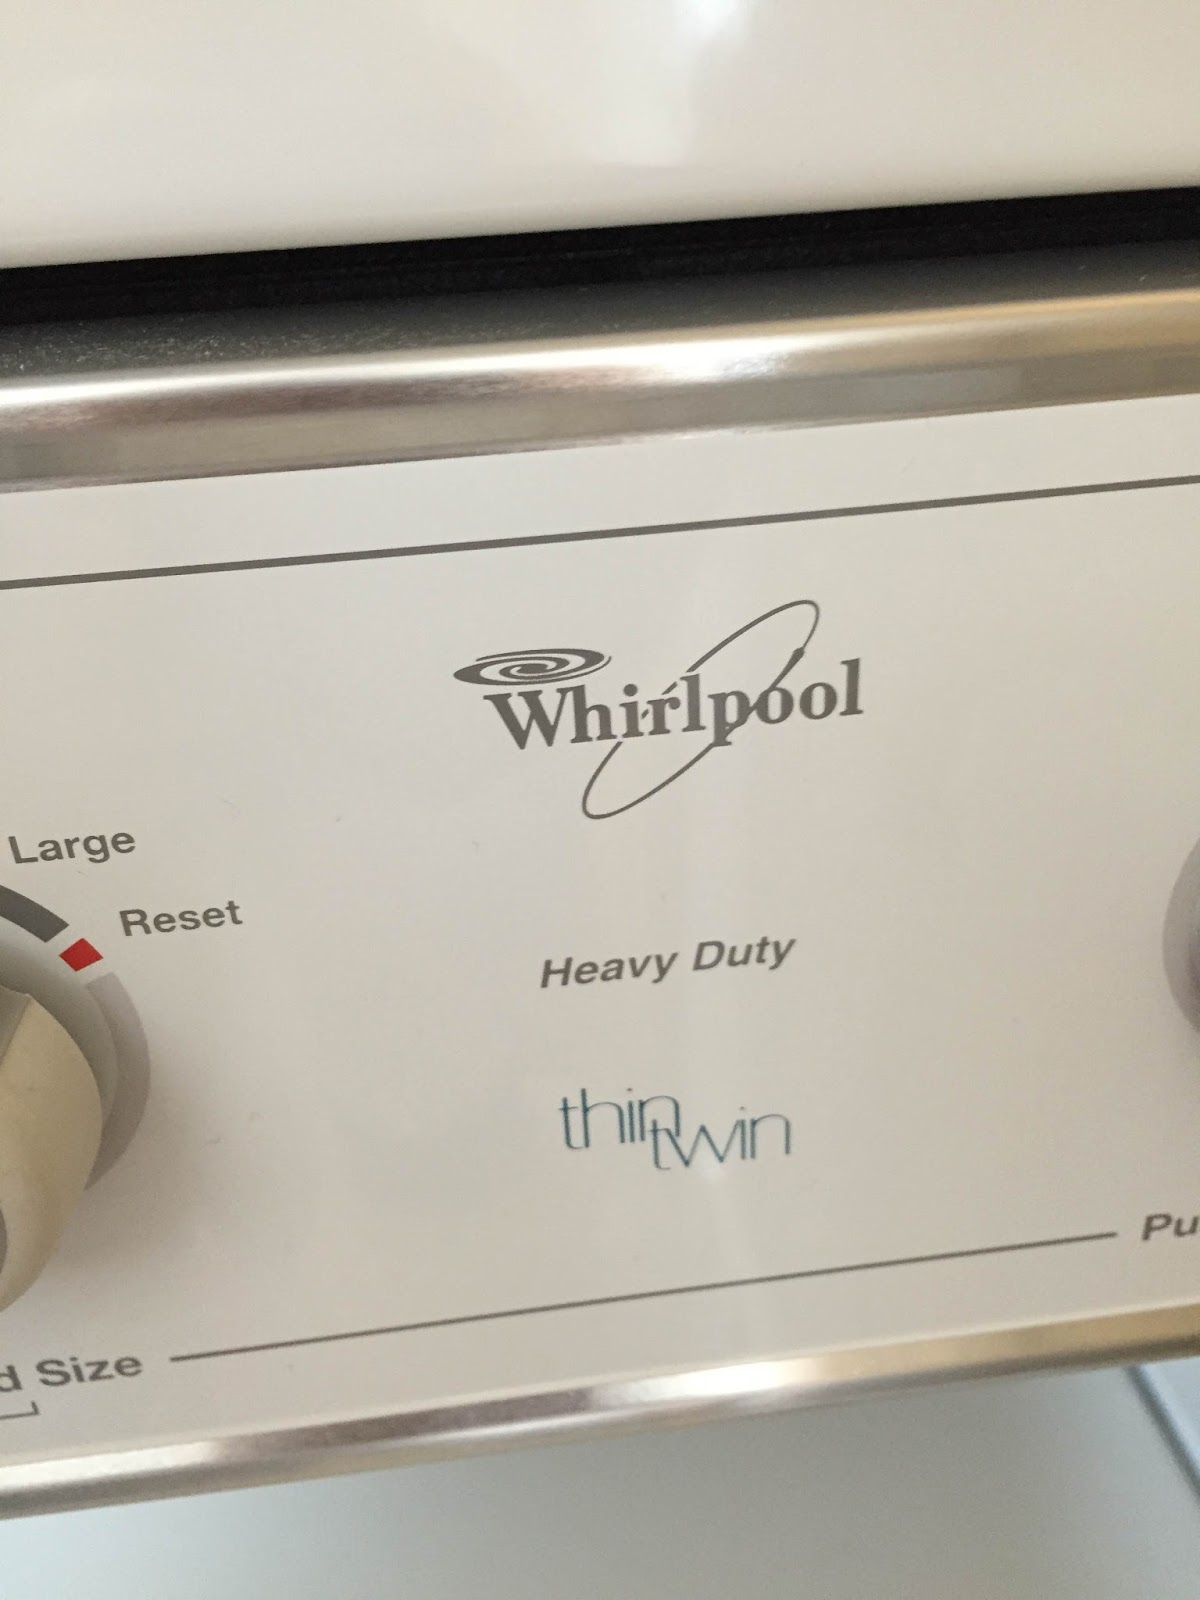 Quickly Get Answers: Annoying dryer buzzer on the whirlpool thin twin